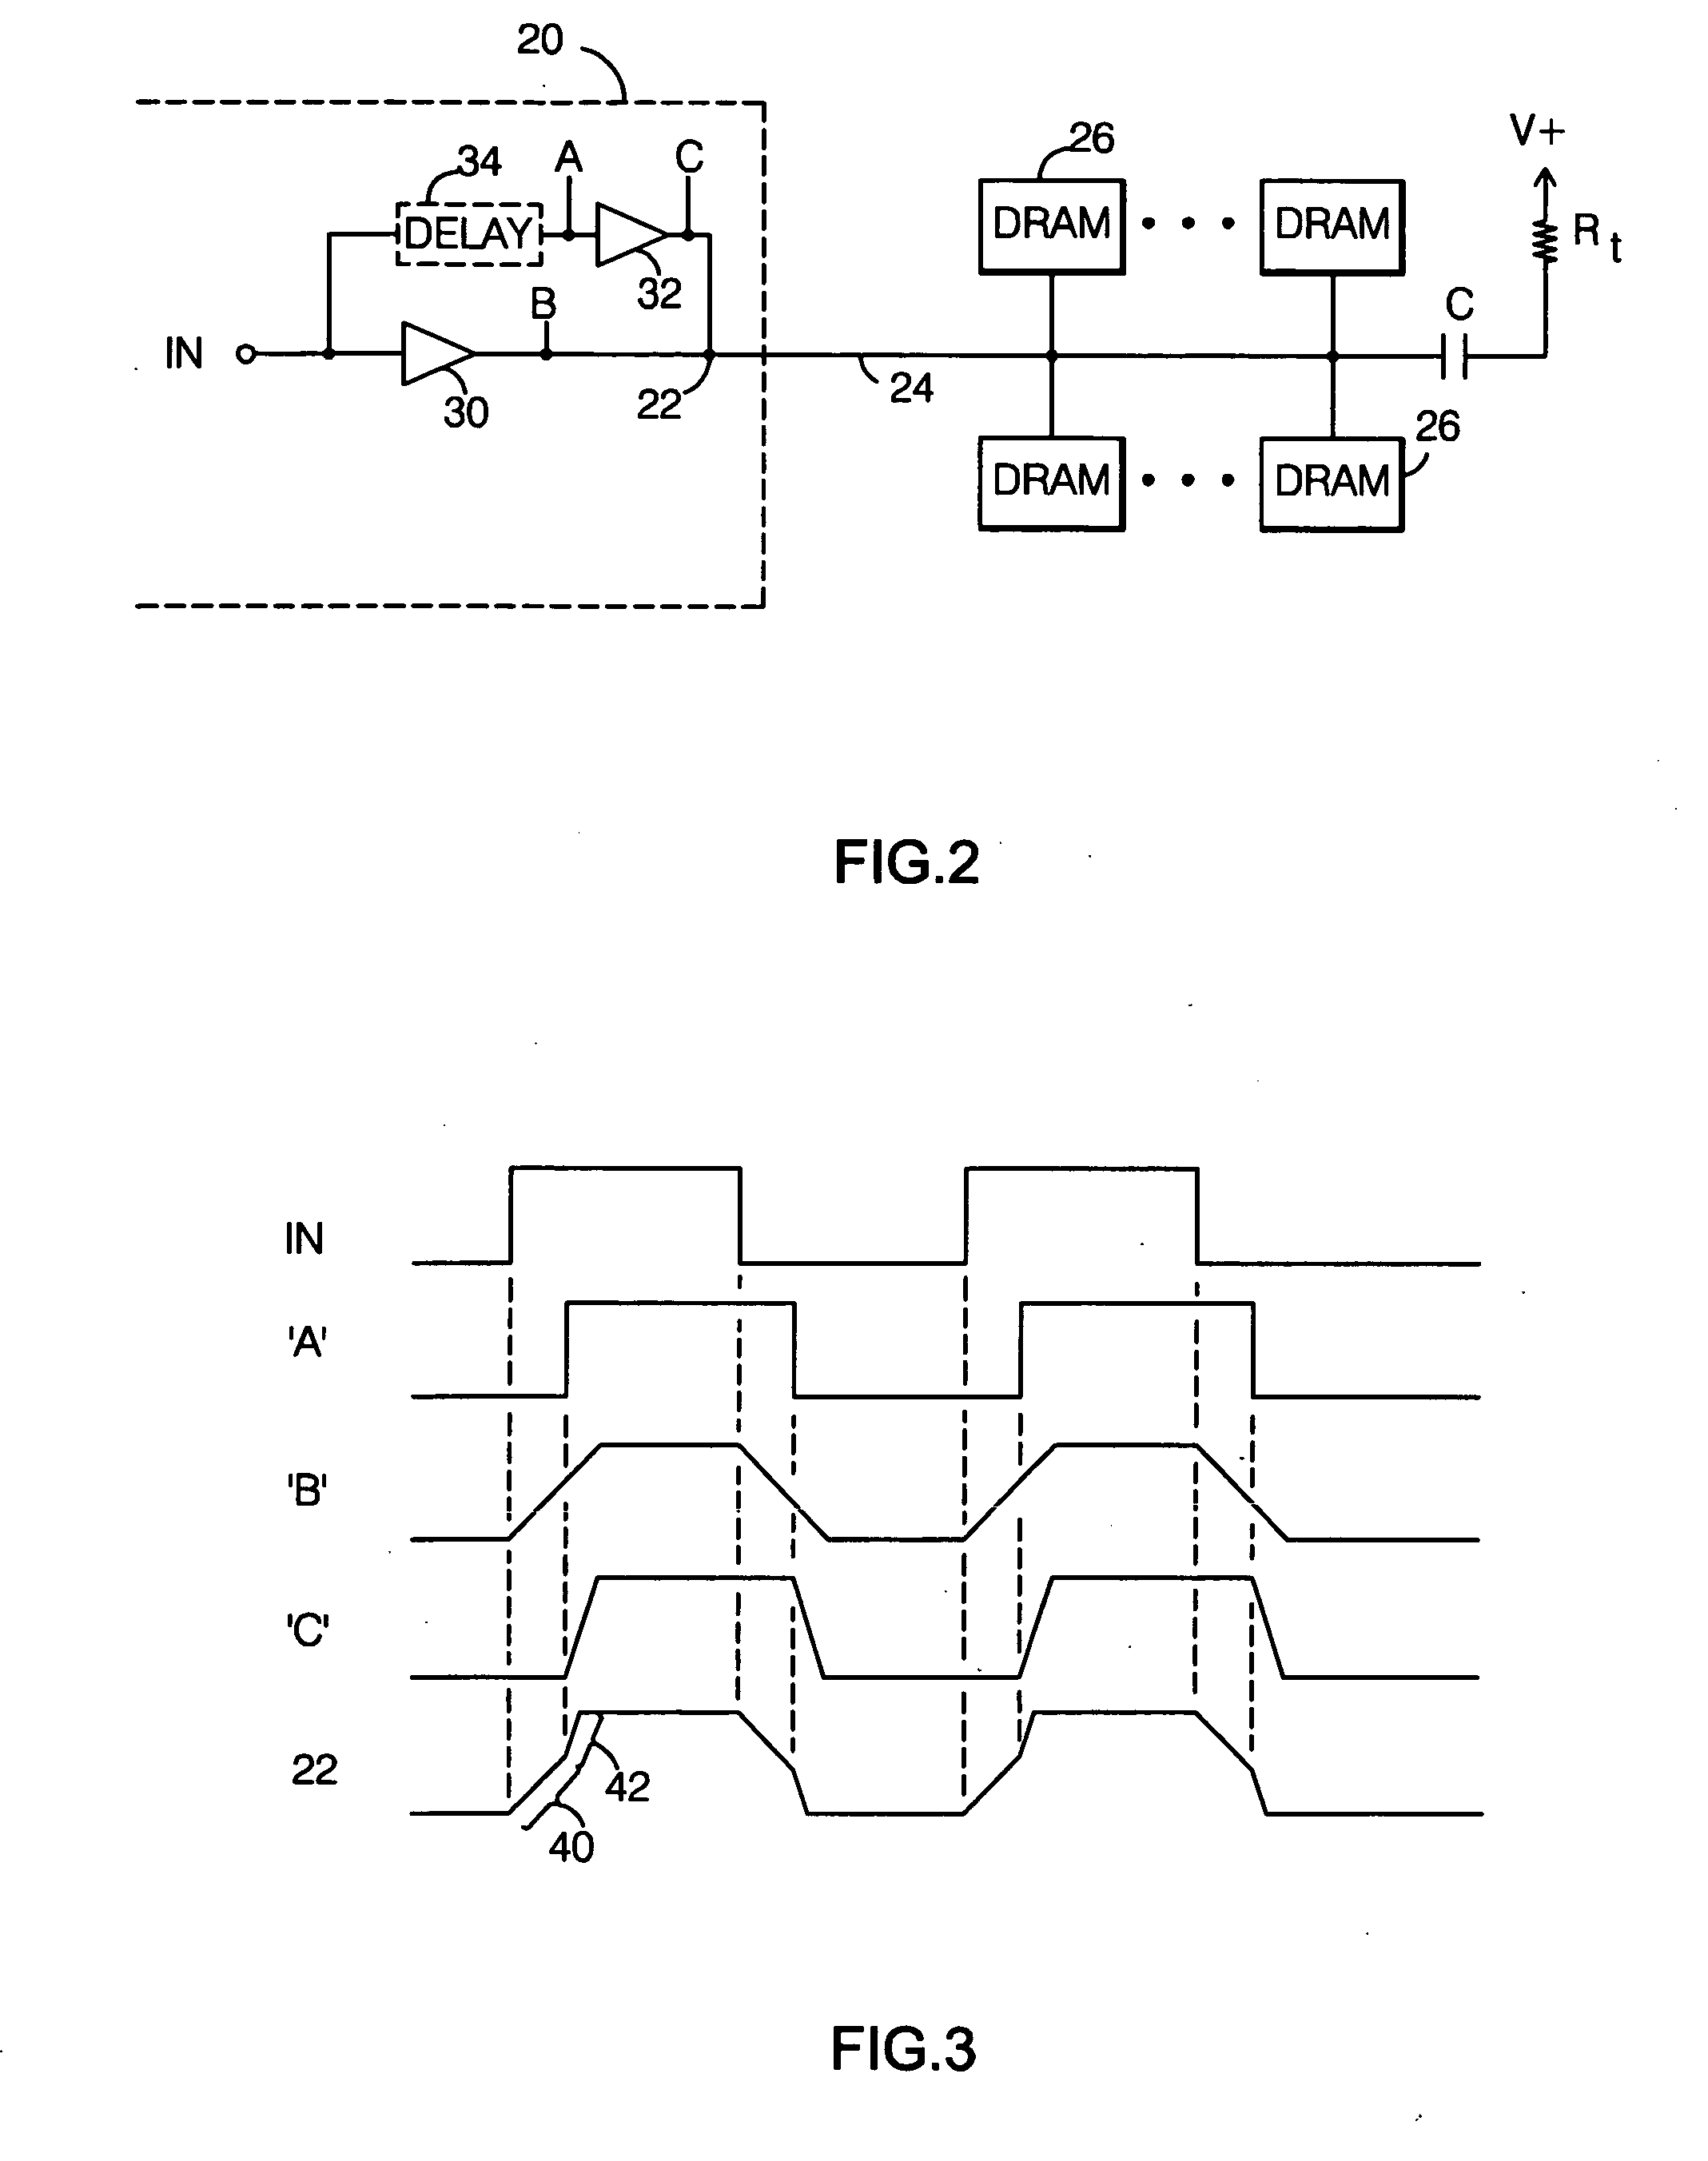 Output buffer to drive AC-coupled terminated transmission lines